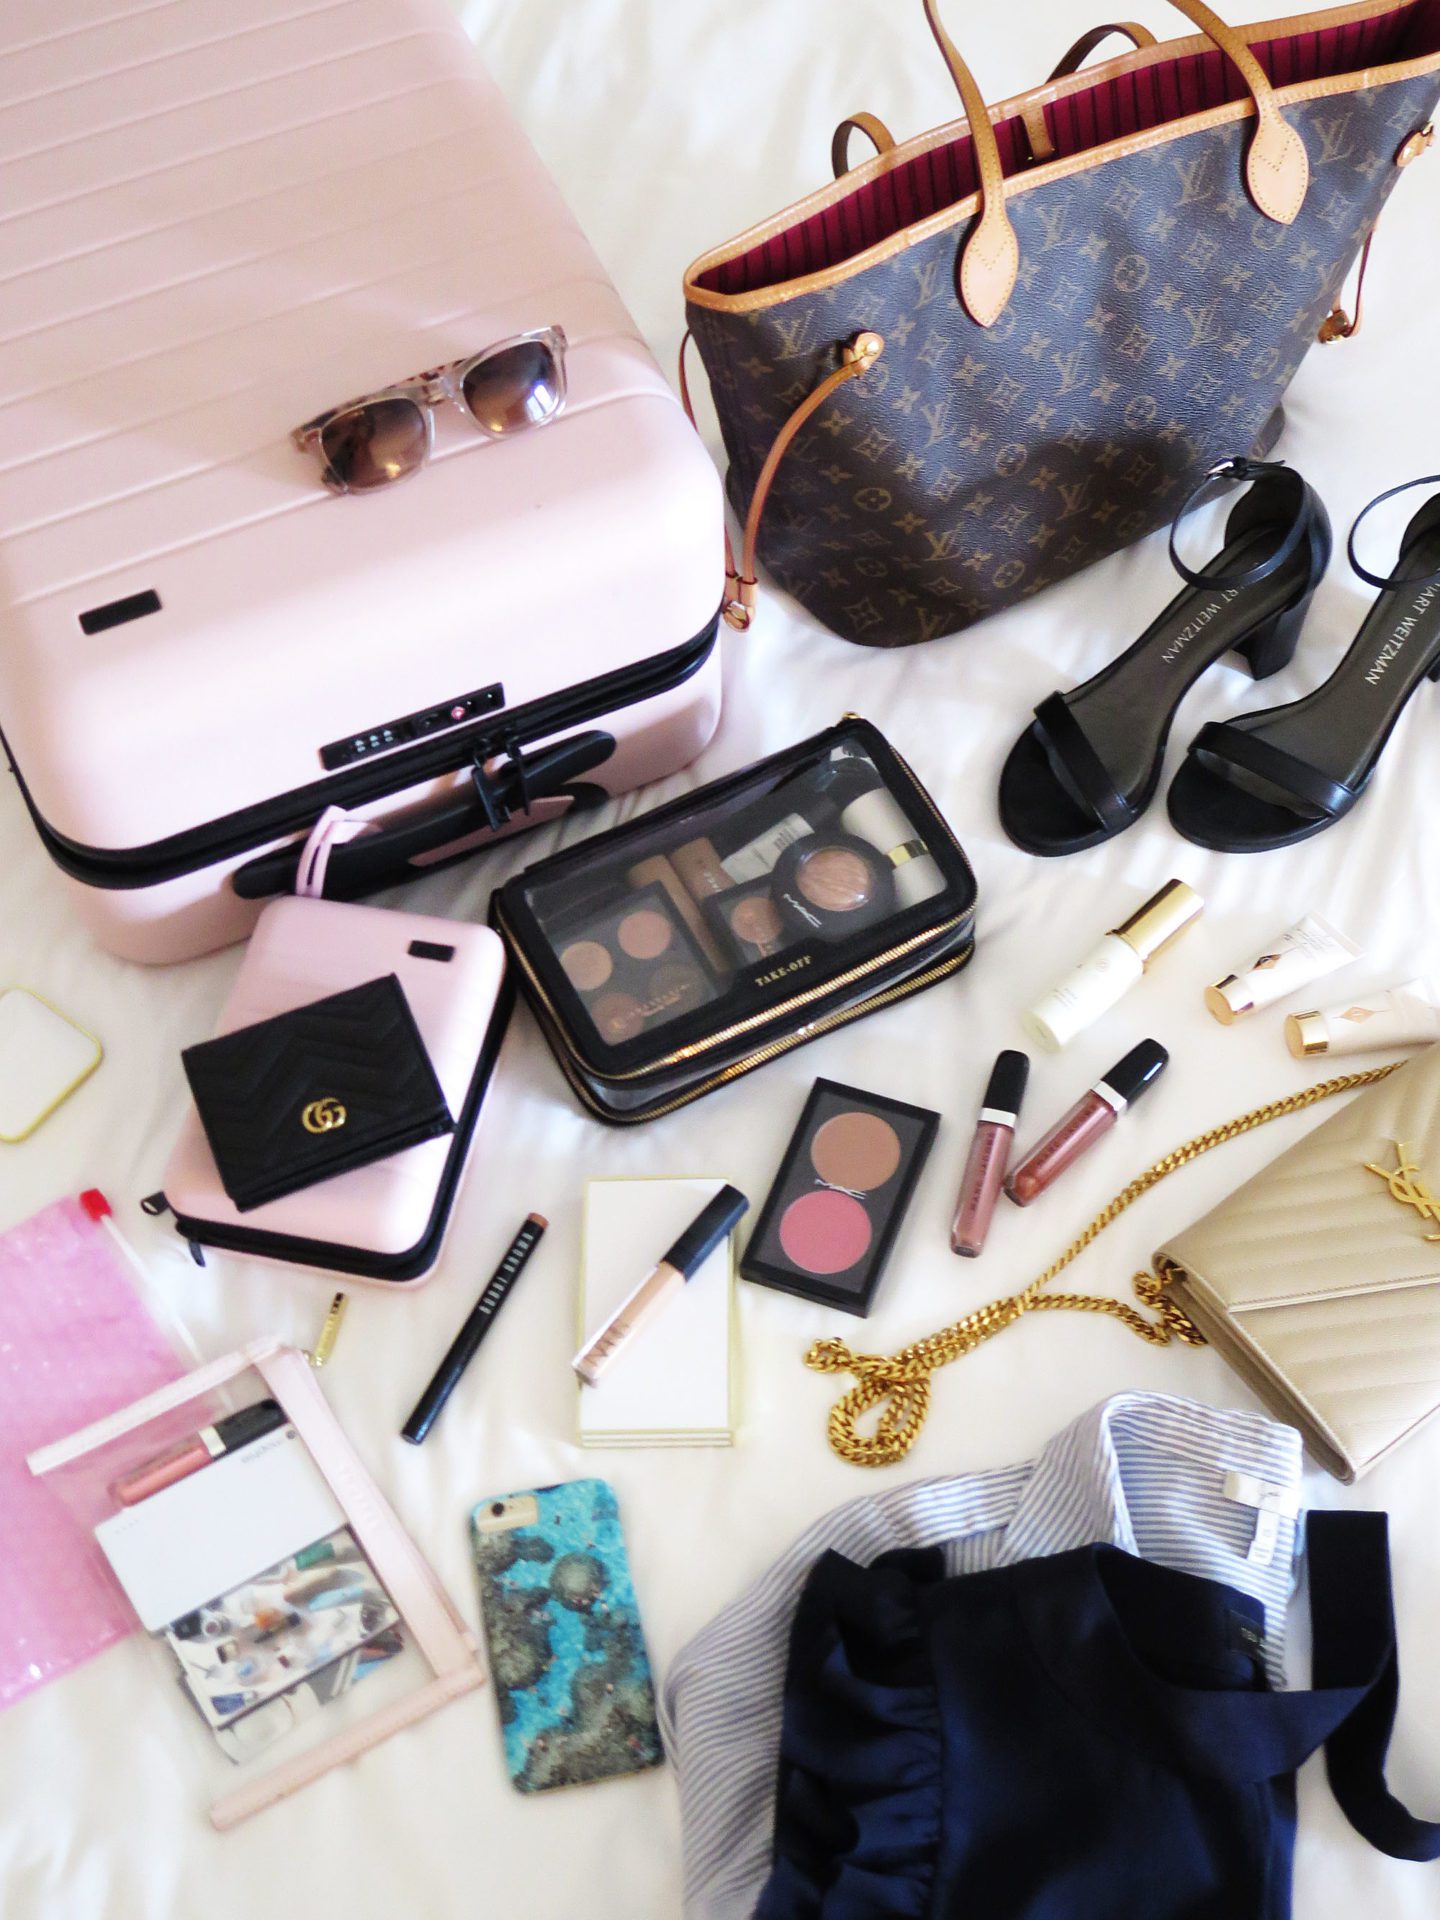 Away Bigger Carry On Luggage | The Beauty Look Book